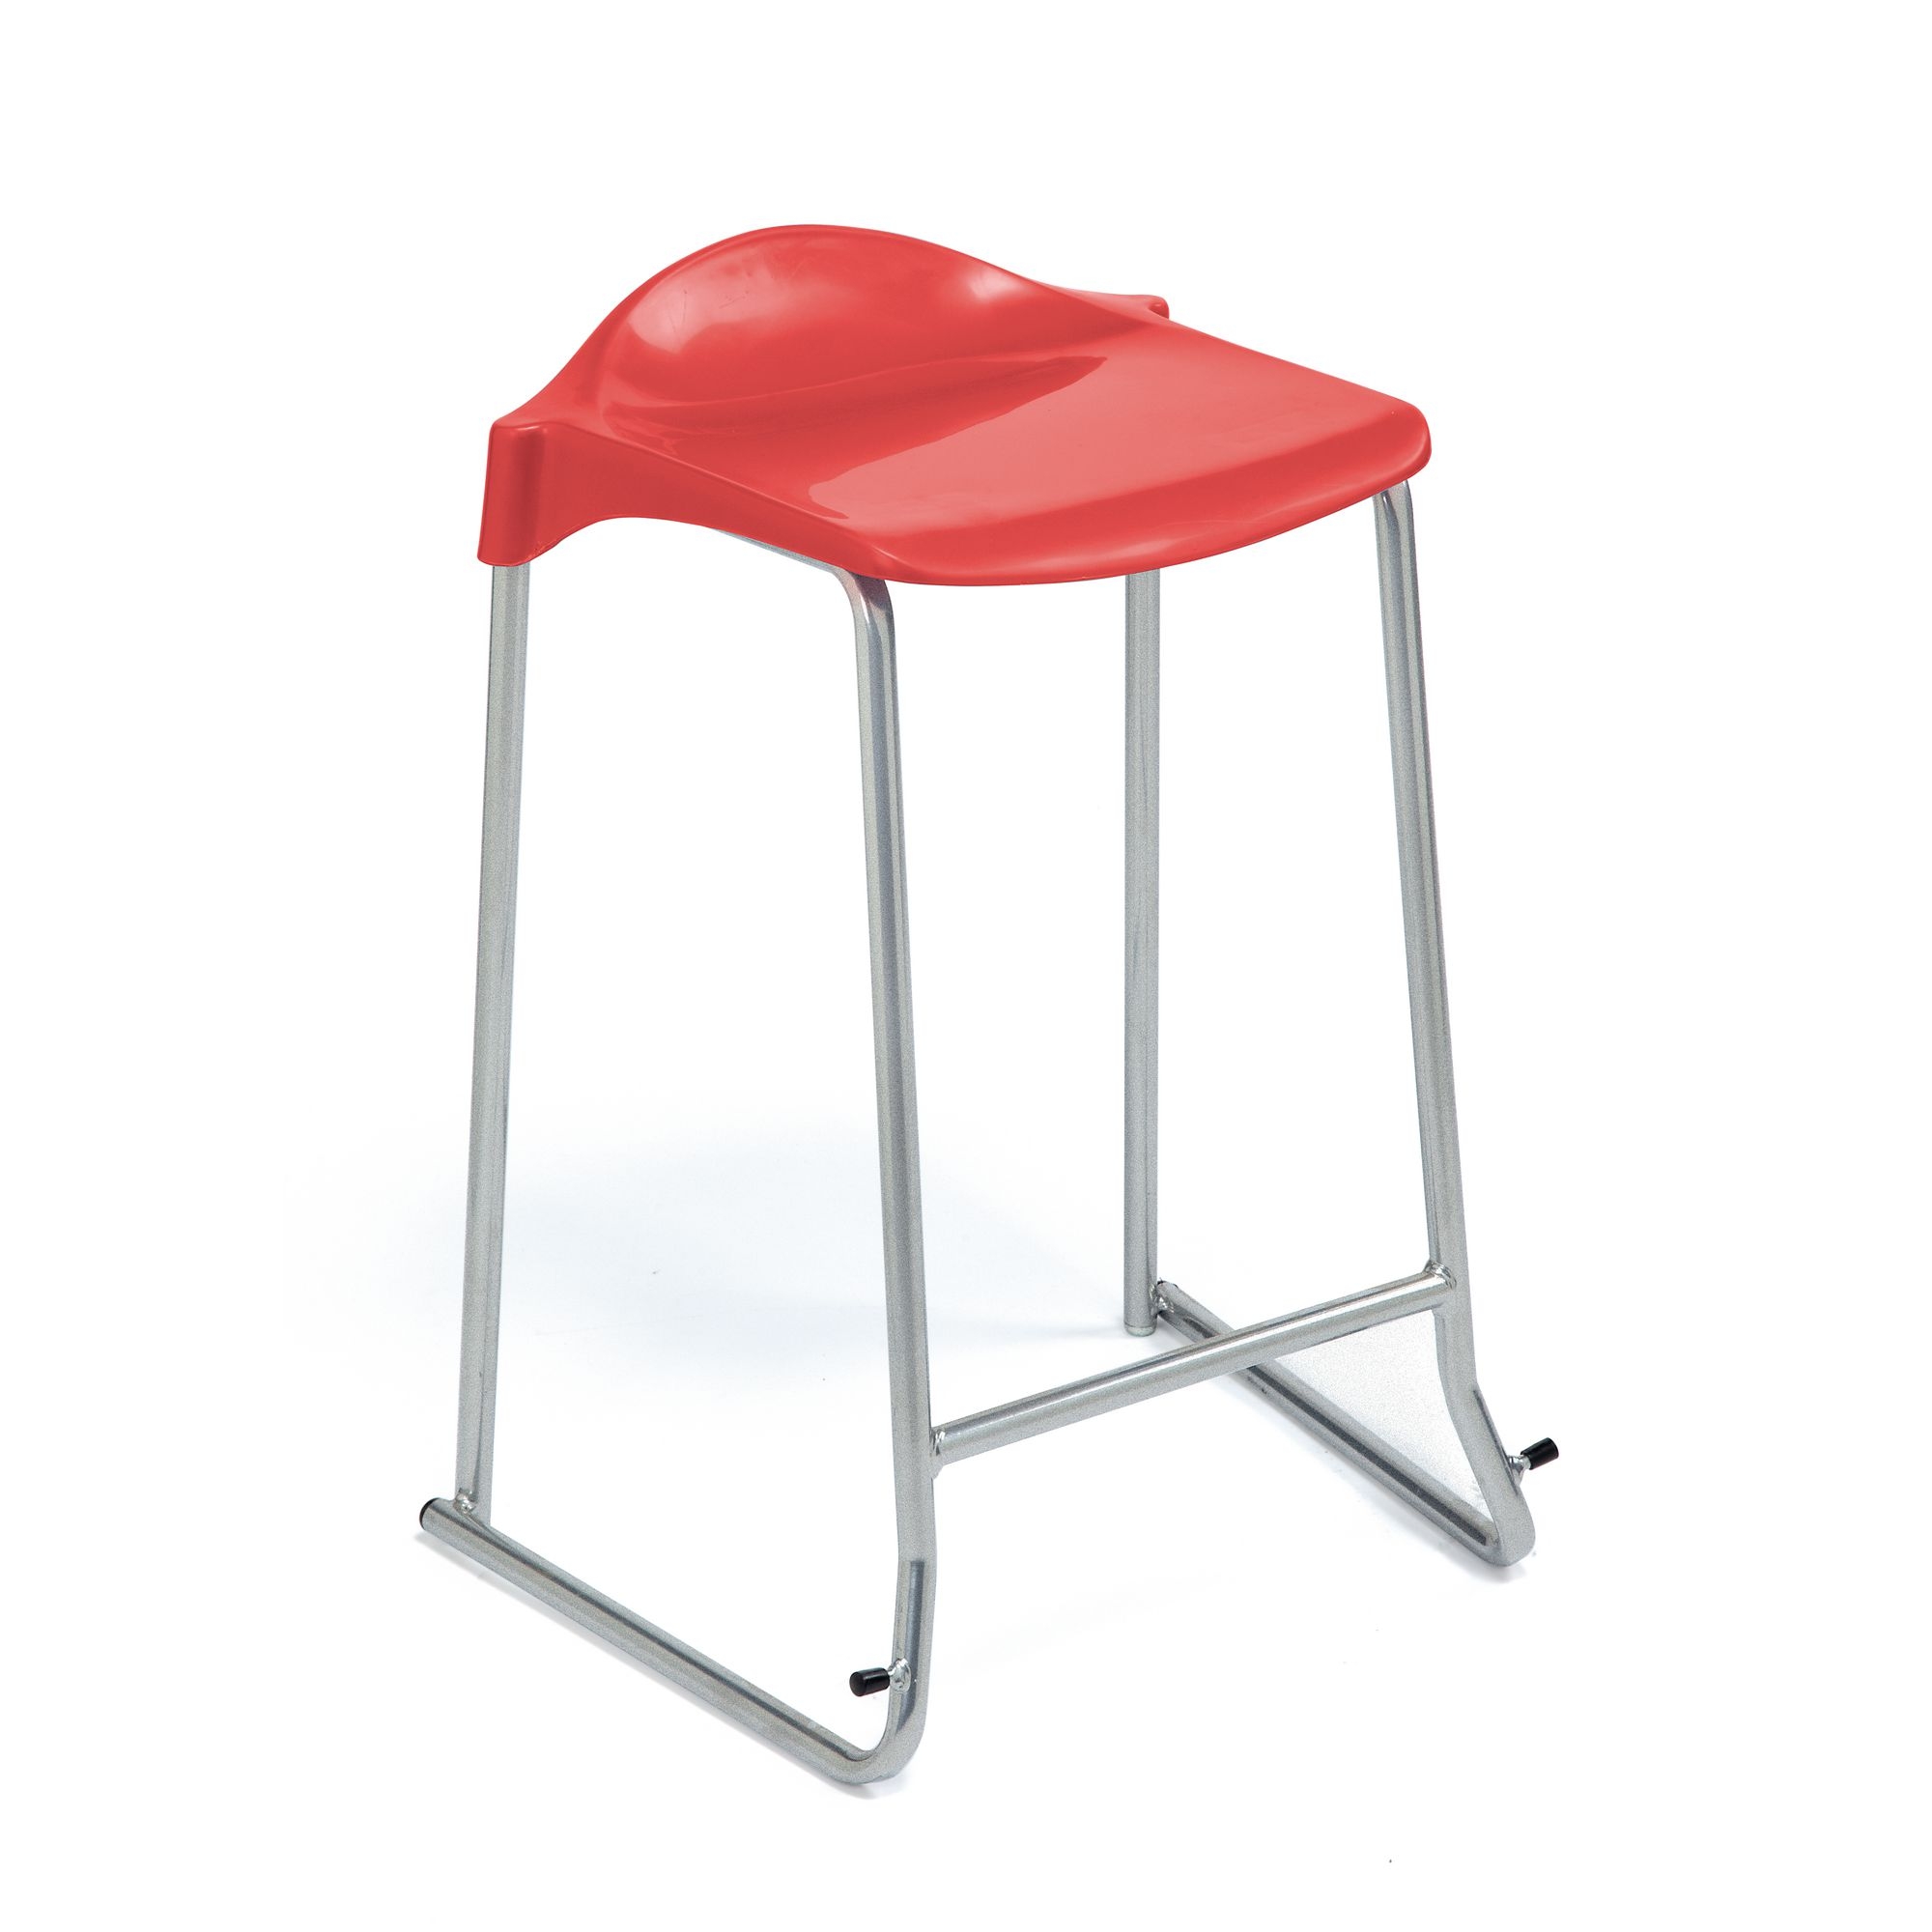 WSM Skid Base Stool - Seat height: 685mm - Red